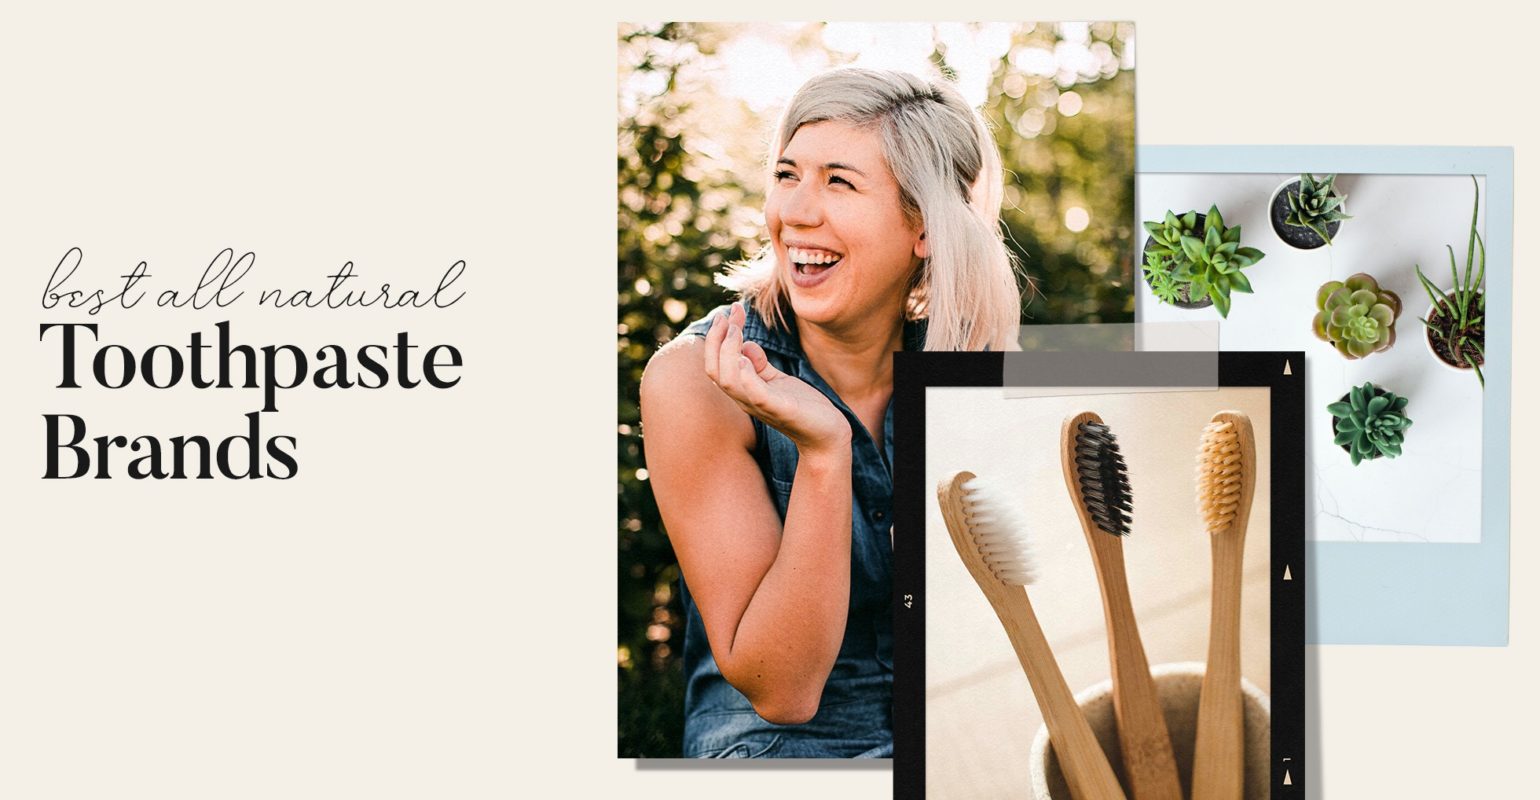 Best All Natural Toothpaste Brands